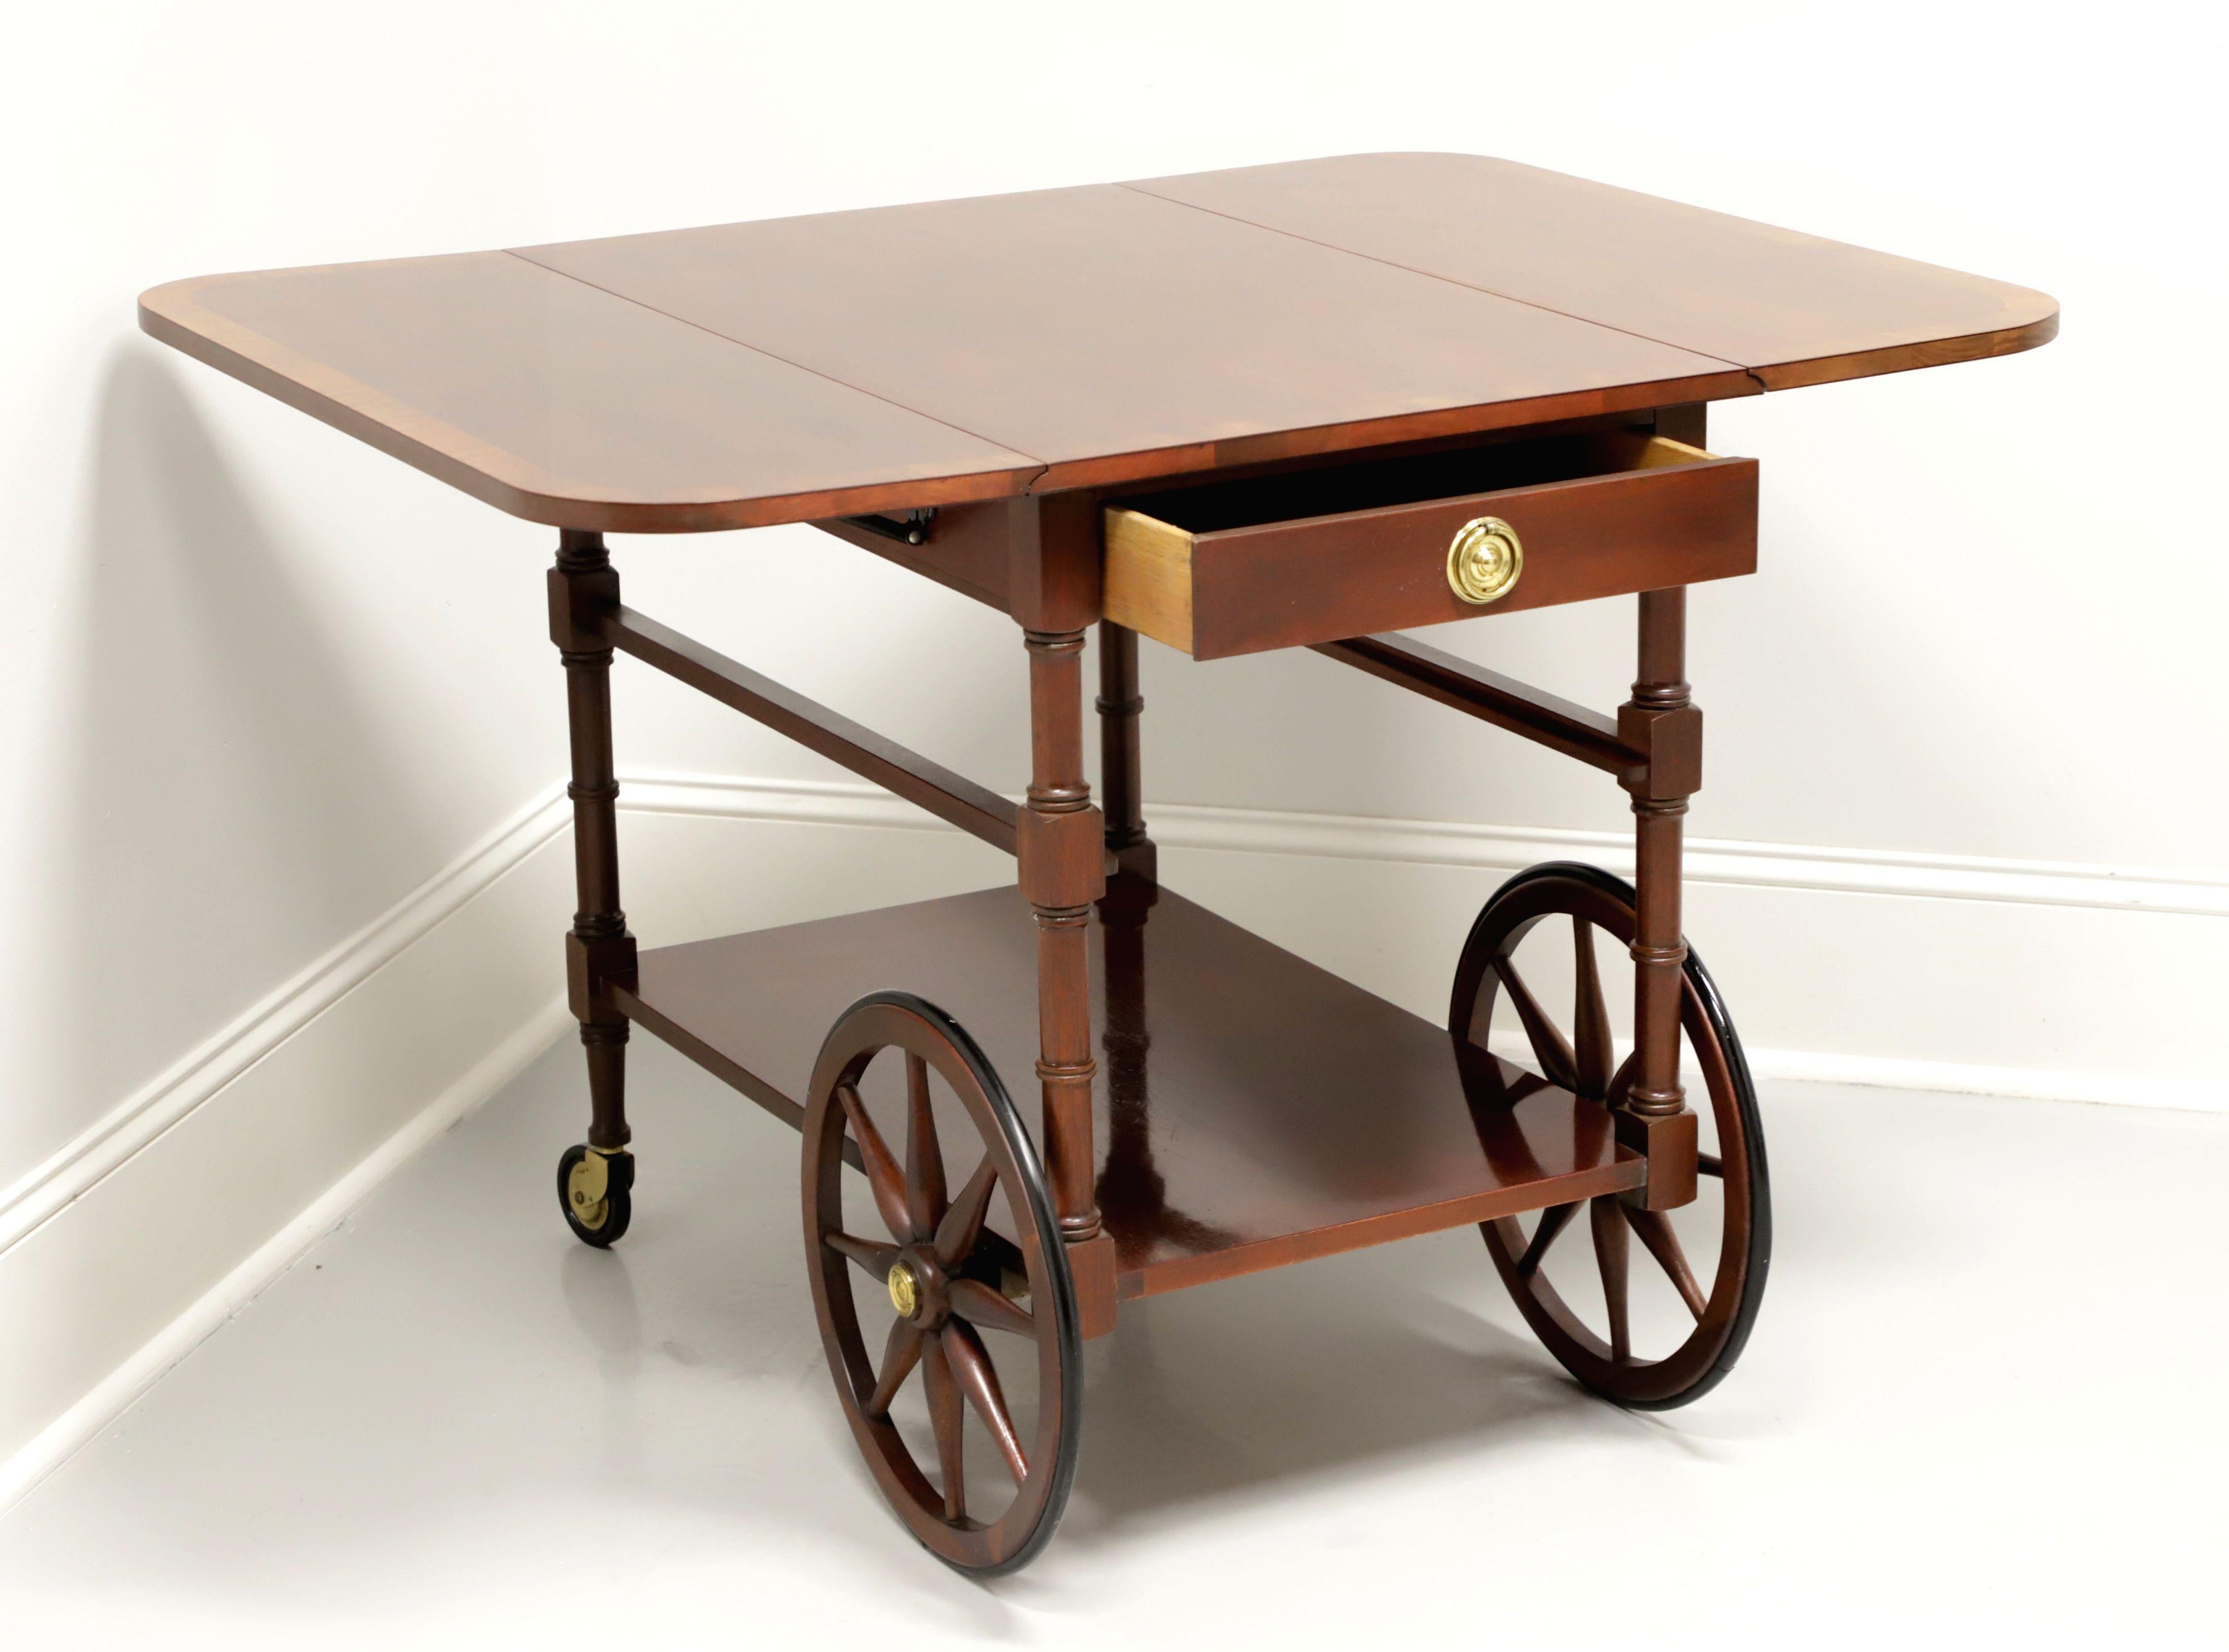 A Federal style rolling drop leaf tea cart by Baker Furniture. Mahogany with banded top, brass hardware, expandable by two drop leaves, fold-down handle, track for storing a removable tray, lower shelf, turned front legs with casters and large spoke